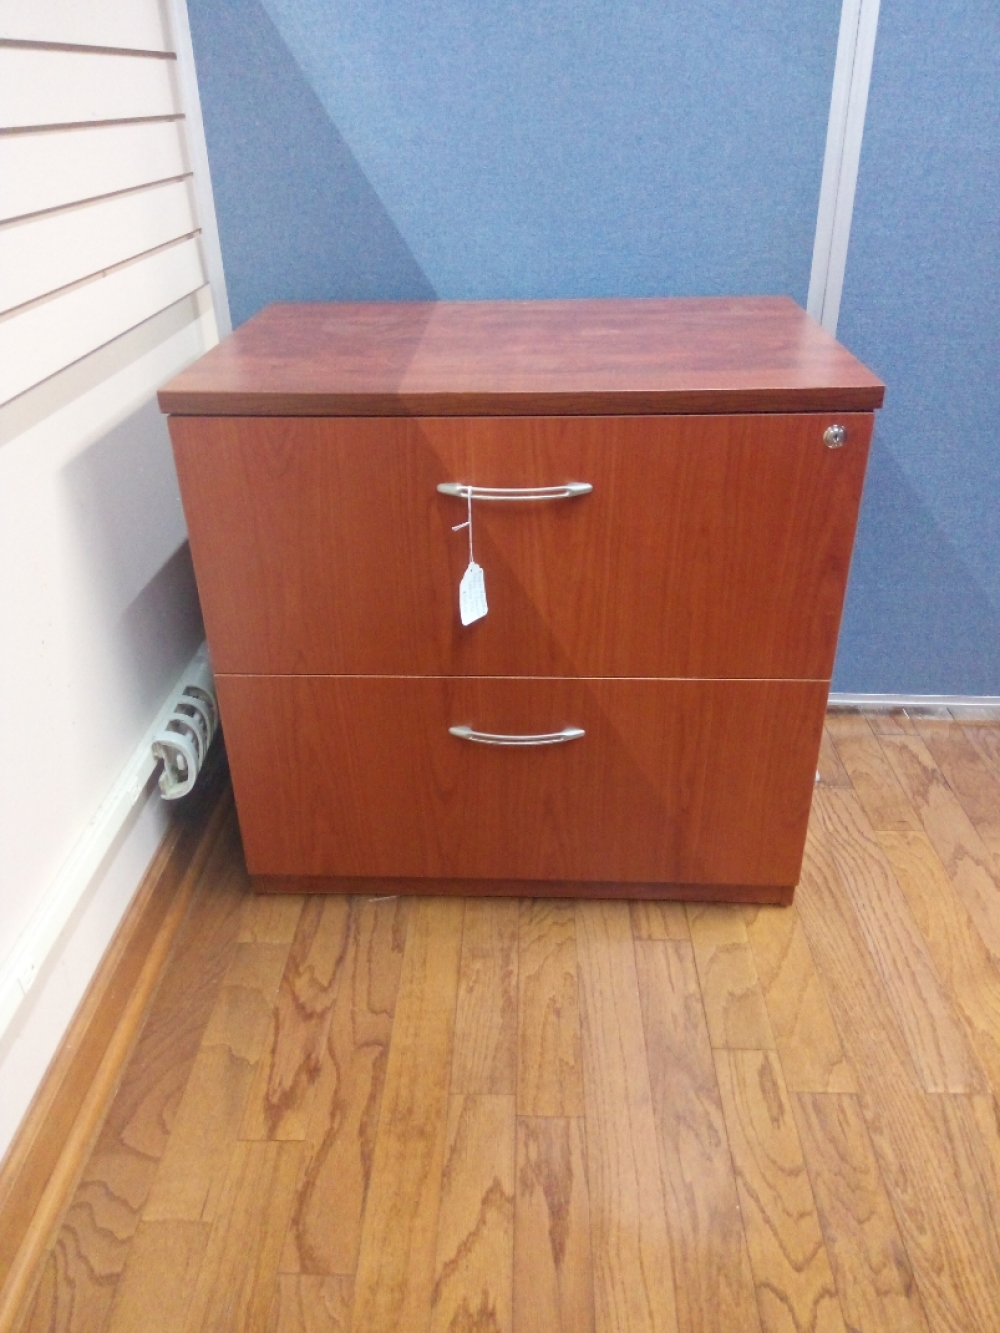  Mayfair  Cherry 2 Drawer Lateral File